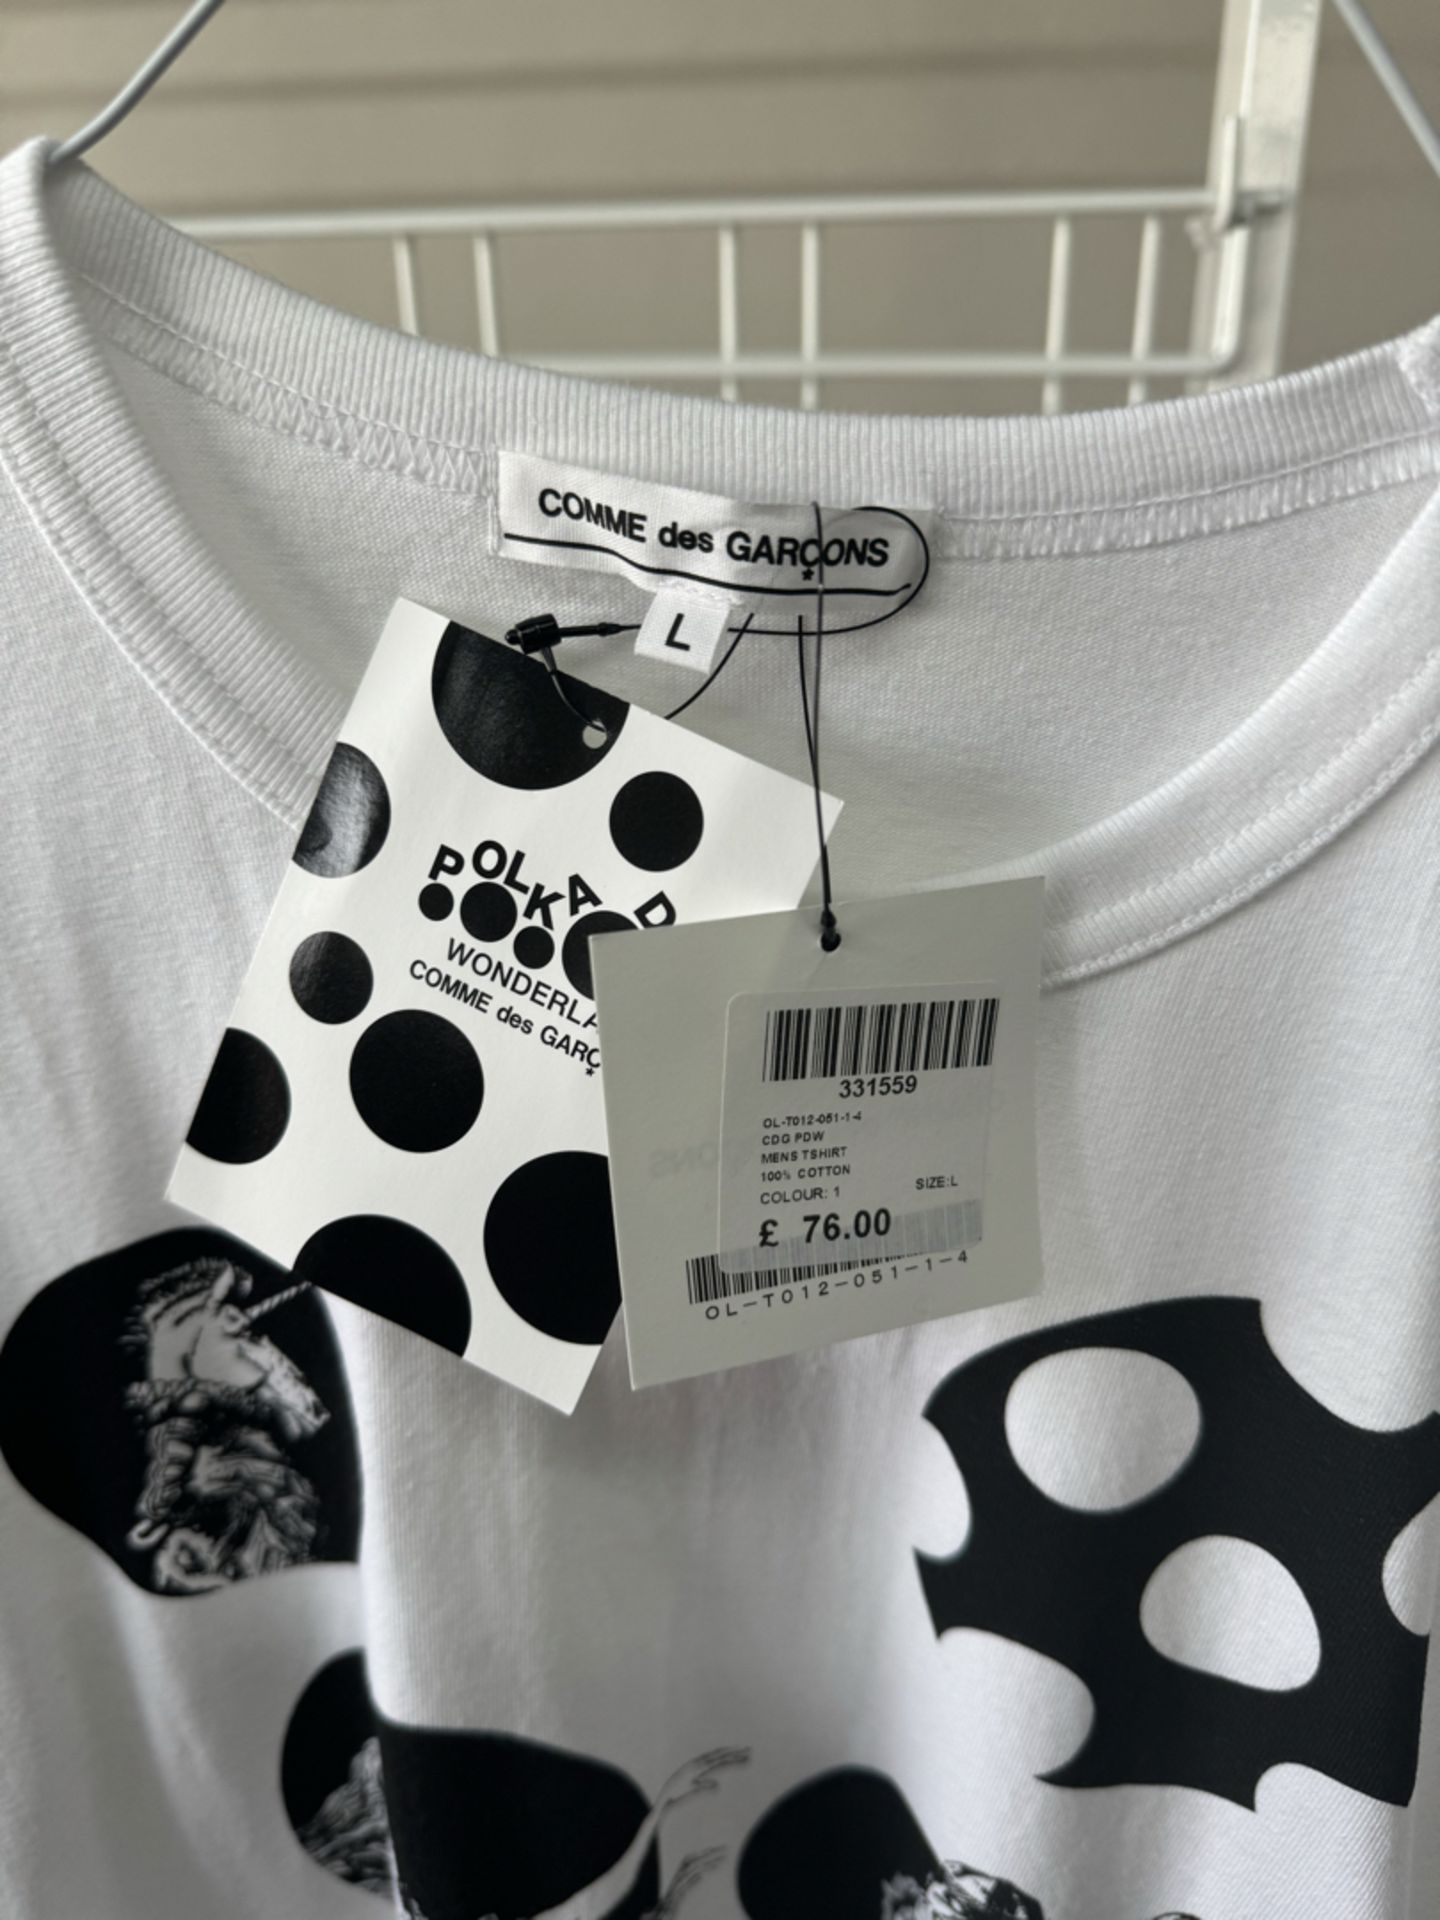 Comme Des GarÃ§ons Unisex T-Shirt - New with Tags - Size Small fit Large - RRP Â£76 - NO VAT! - Image 3 of 3